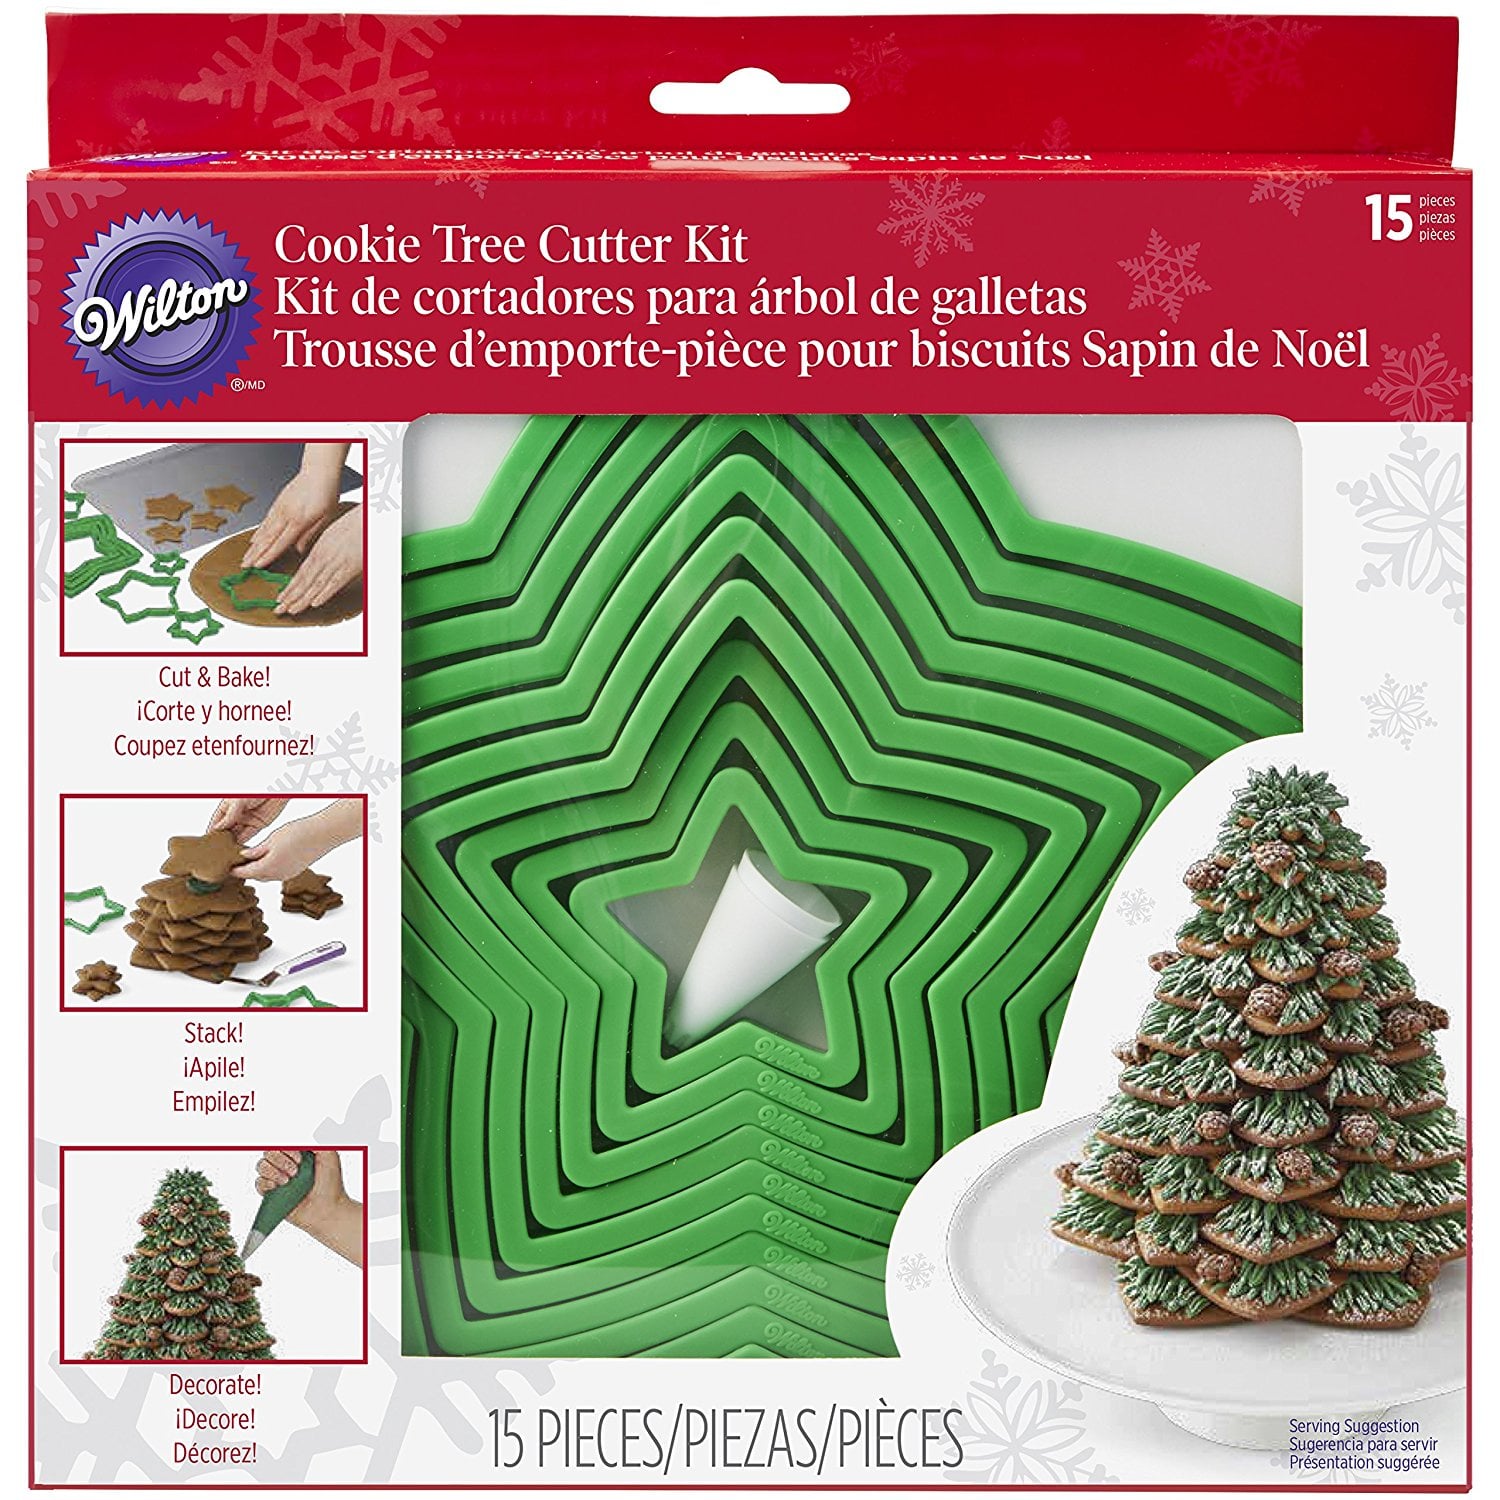 3 Tree Star 3-Piece Set Ornament R&M International 1981 Christmas Cookie Cutters with Interior Cut-Outs